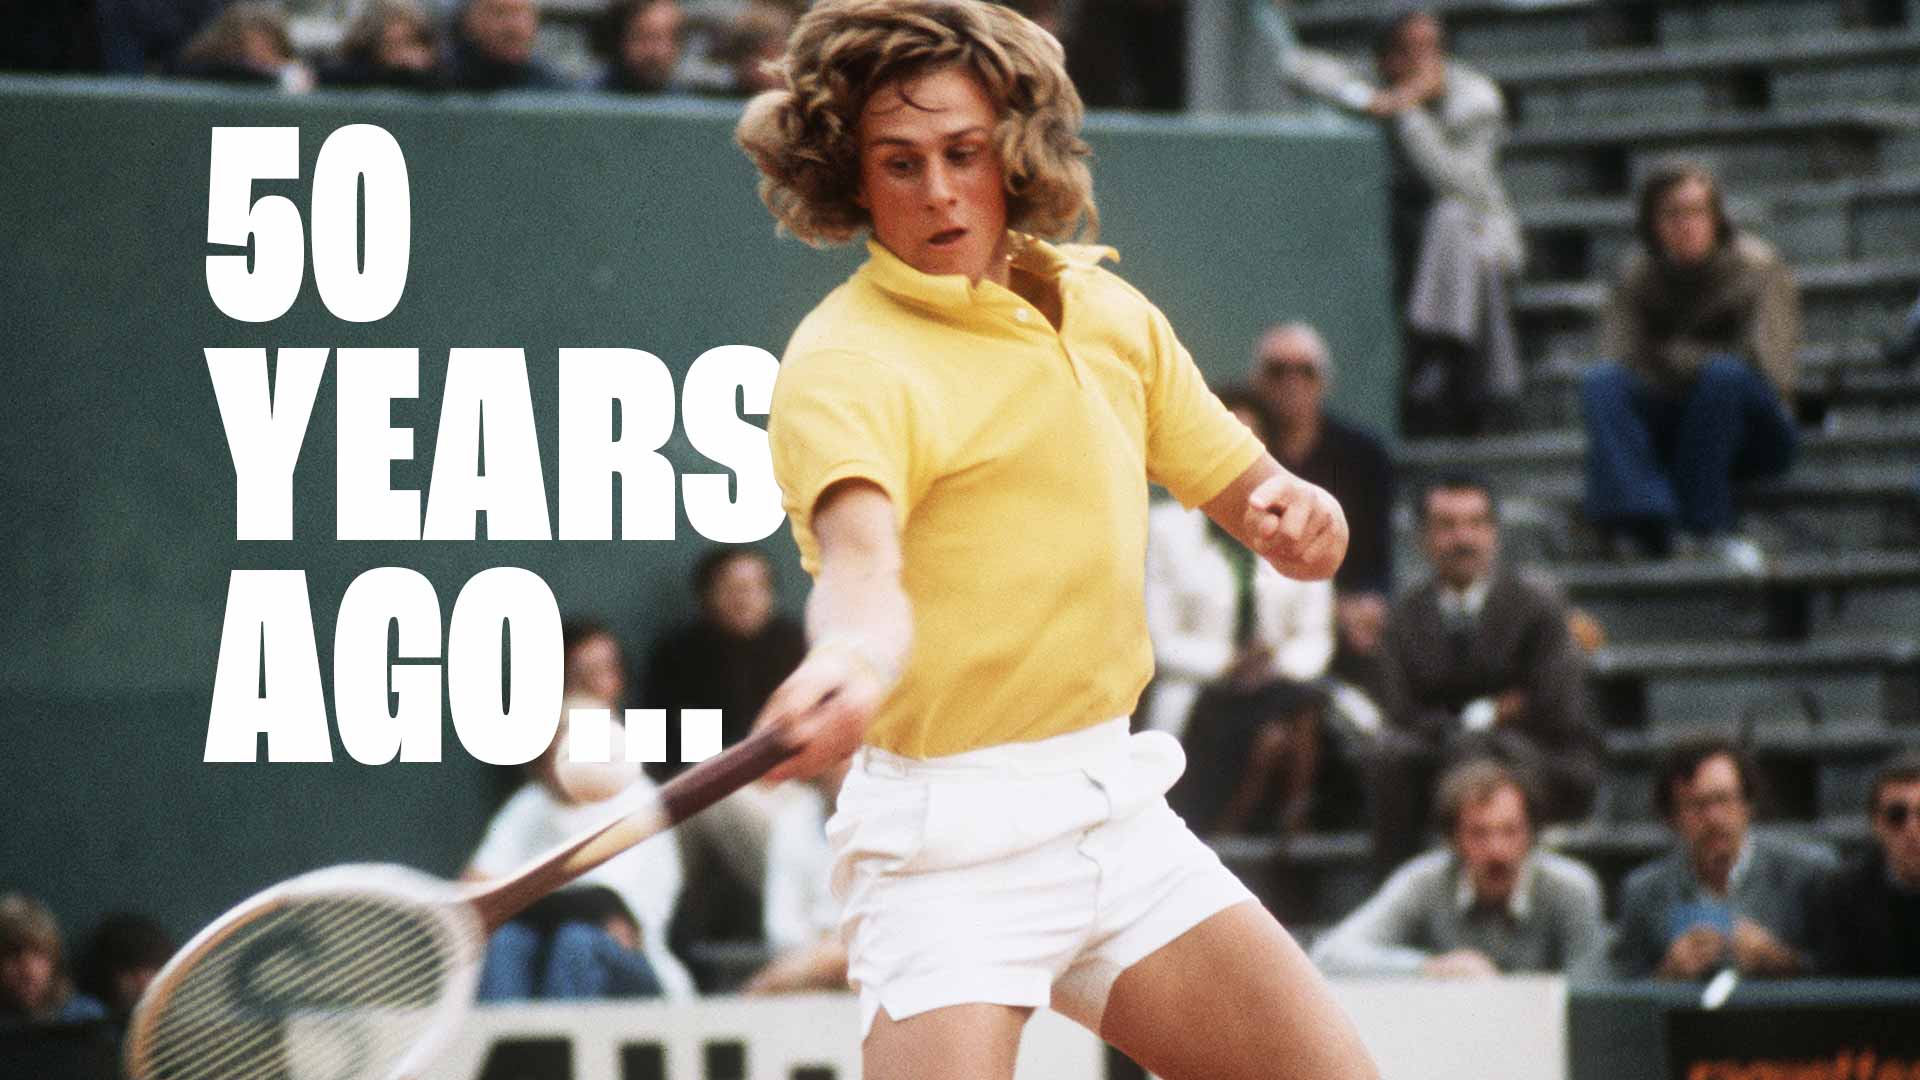 Bjorn Borg captured his first major title in 1974 at Roland Garros.